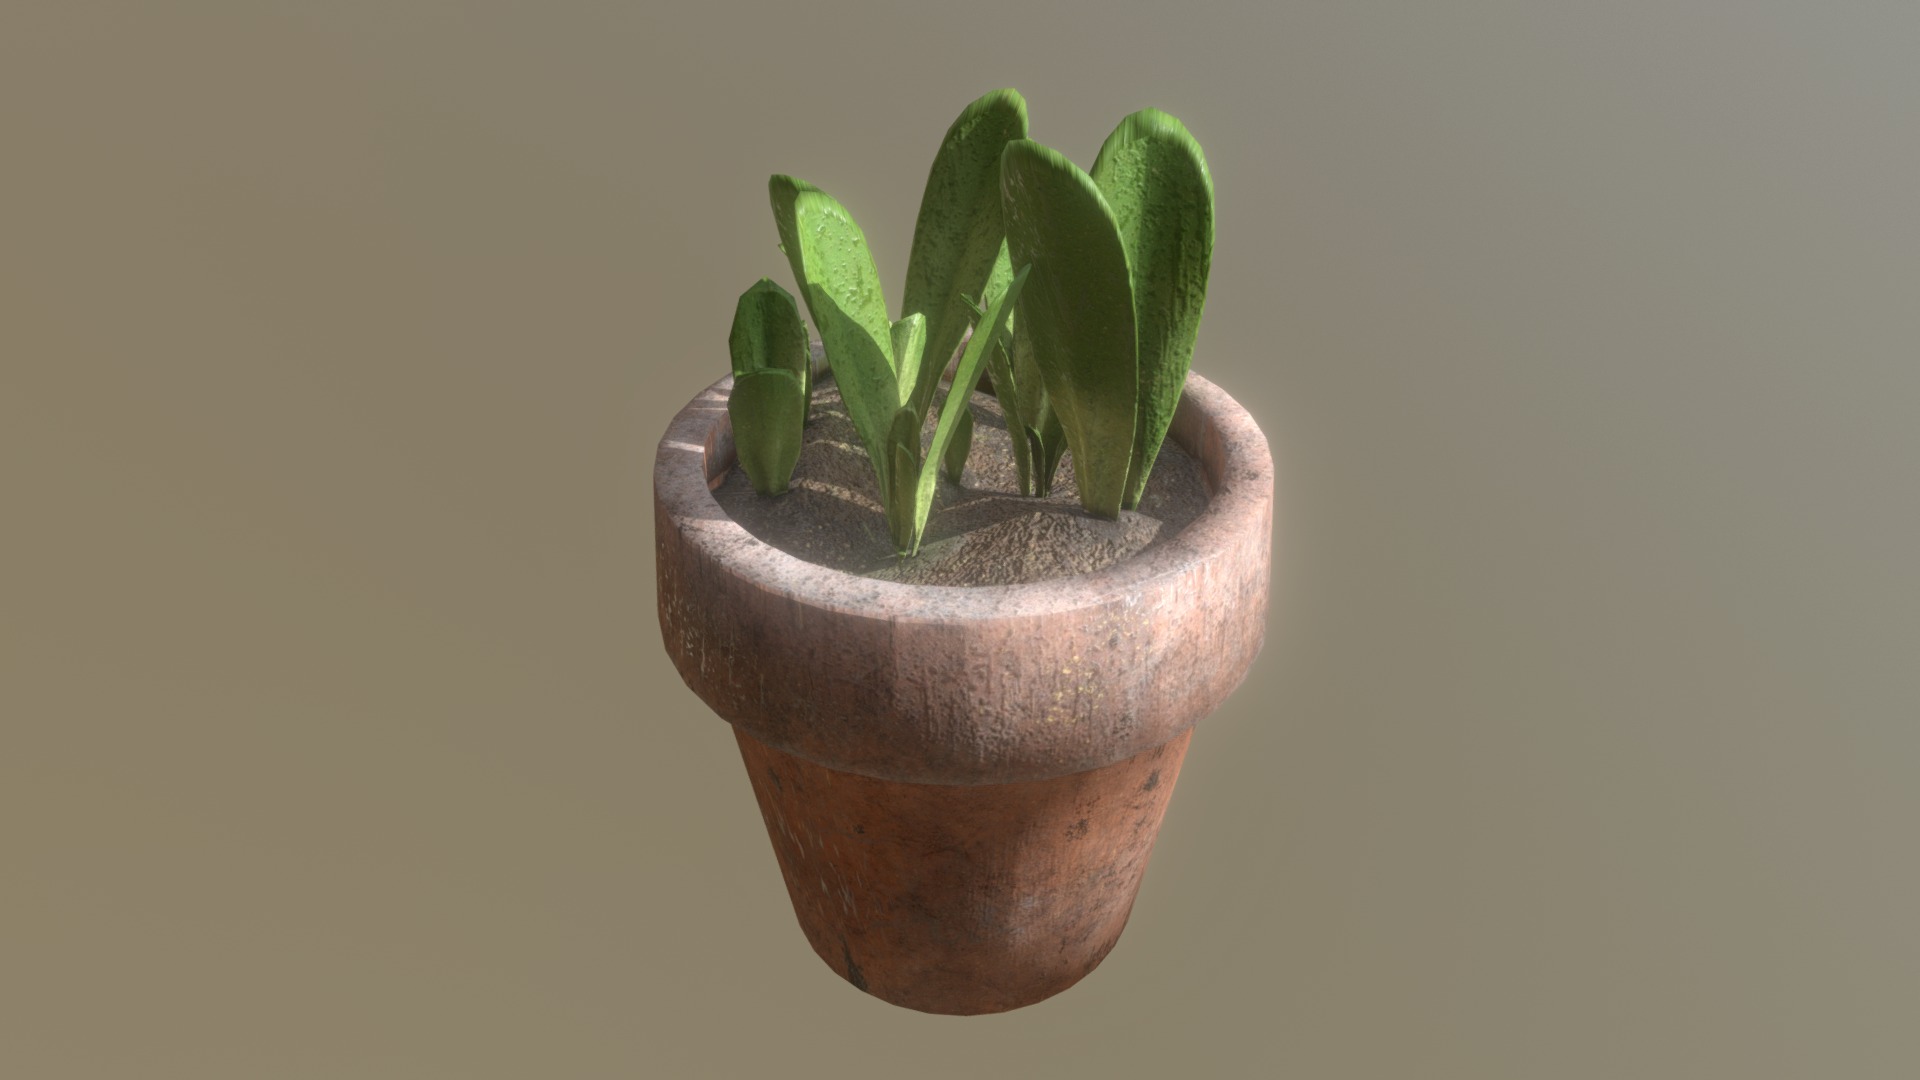 3D model Lettuce Sprouts in a Pot - This is a 3D model of the Lettuce Sprouts in a Pot. The 3D model is about a potted plant with a green plant in it.